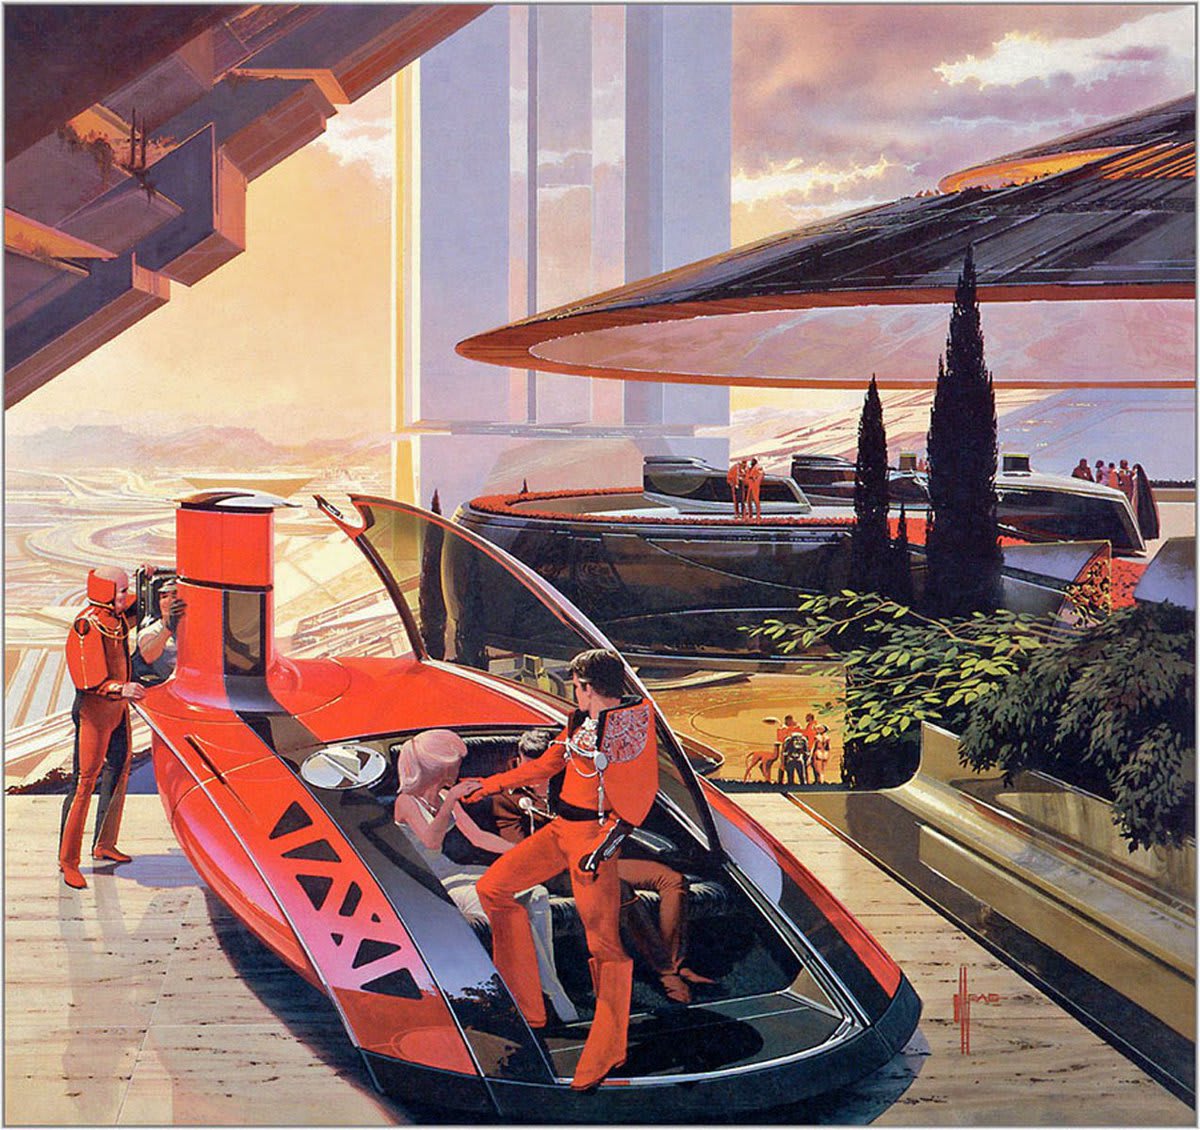 Remembering with wonder the great industrial designer & futurist SydMead, who died this week at age 86. As the concept artist for Blade Runner & Tron, automotive designer & inspiration to countless makers & visionaries, his legacy is everlasting.